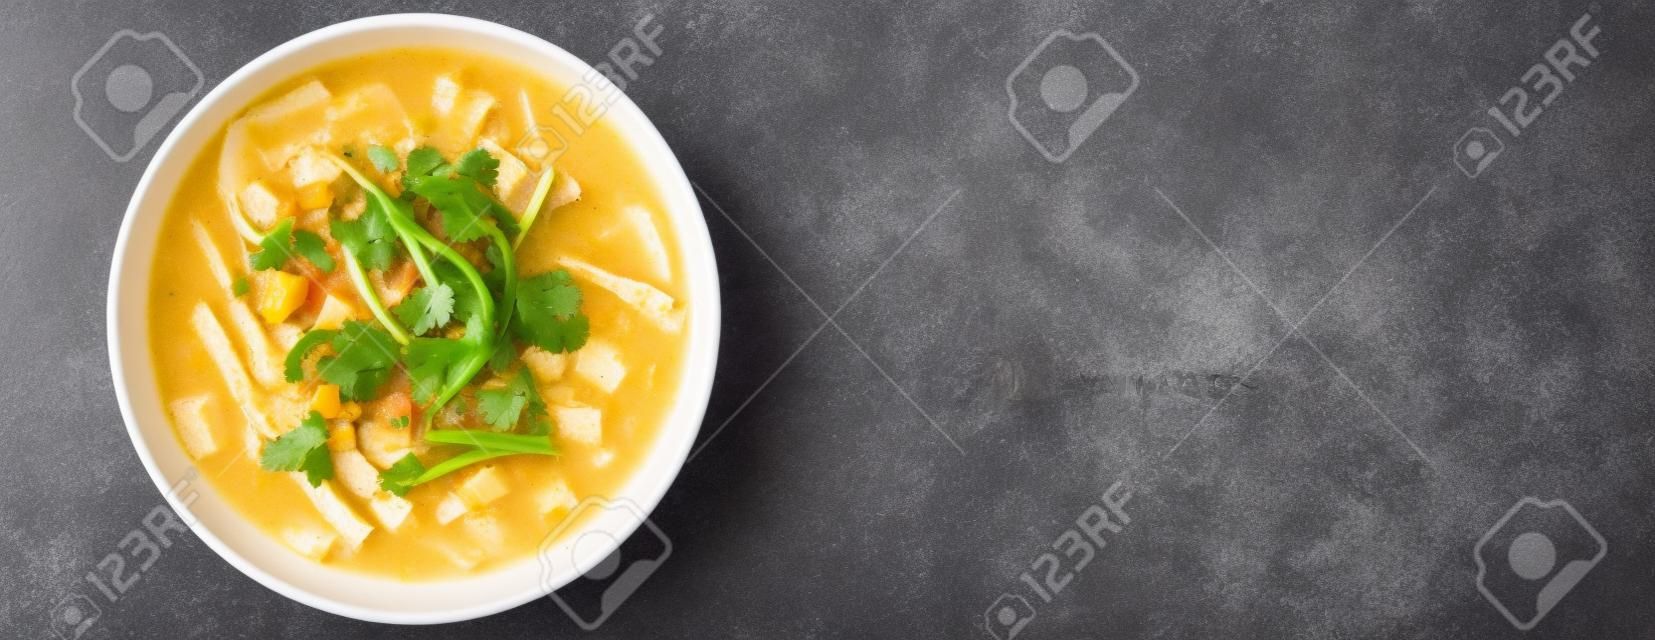 Homemade Sopa a La Minuta in a white bowl on a black surface, top view. Flat lay, overhead, from above. Space for text.